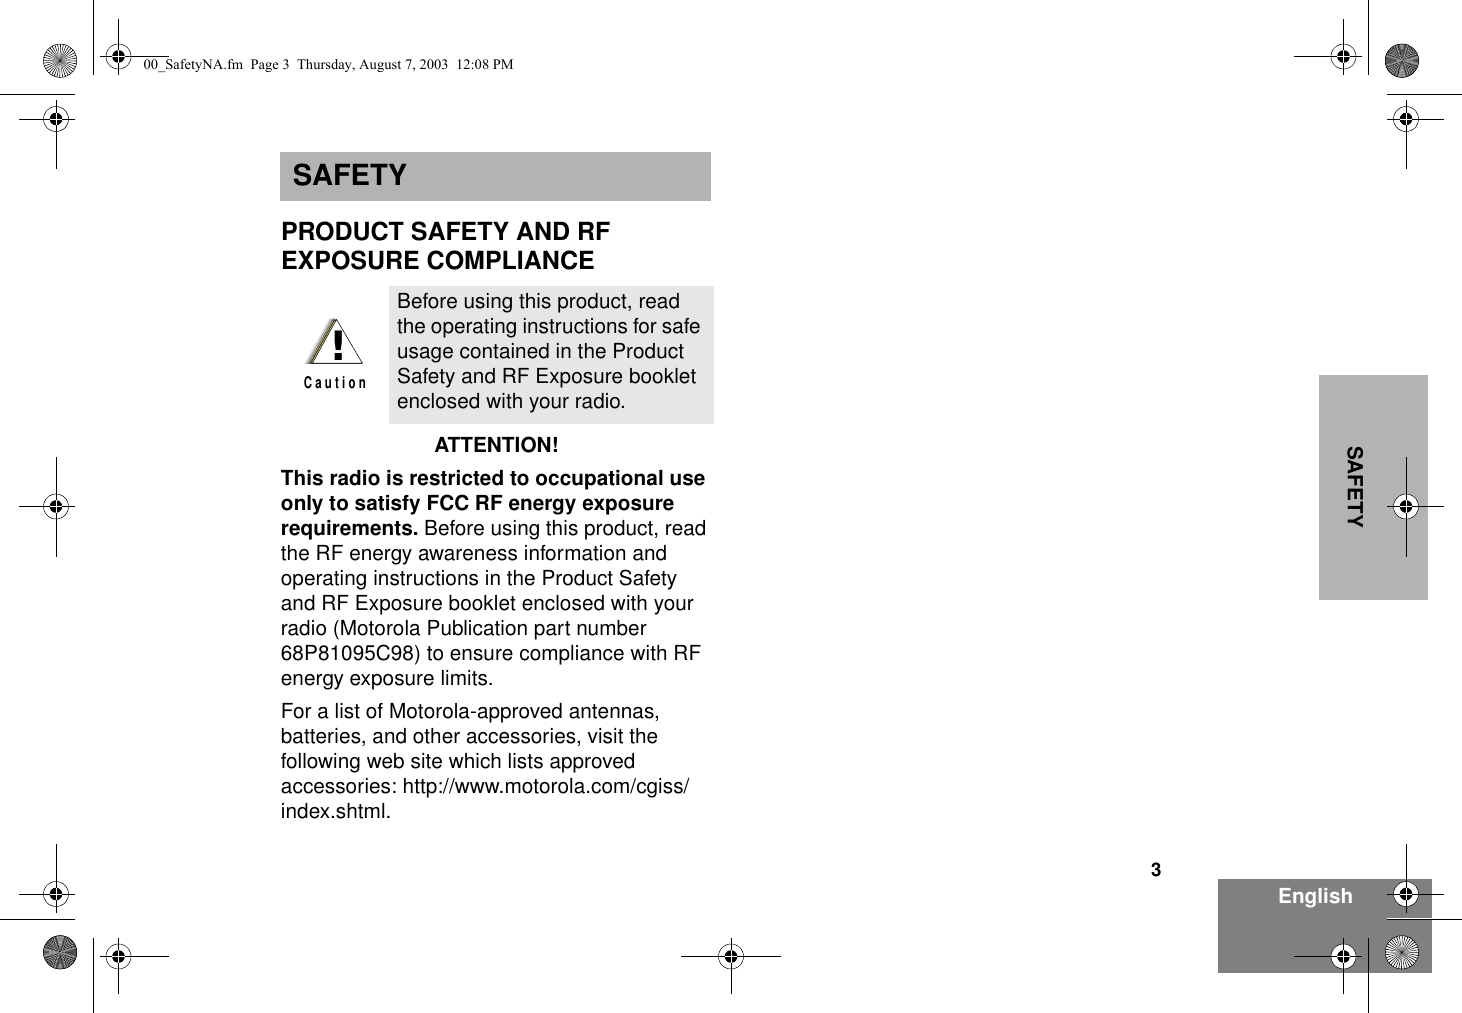 3EnglishSAFETYSAFETYPRODUCT SAFETY AND RF EXPOSURE COMPLIANCEATTENTION!  This radio is restricted to occupational use only to satisfy FCC RF energy exposure requirements. Before using this product, read the RF energy awareness information and operating instructions in the Product Safety and RF Exposure booklet enclosed with your radio (Motorola Publication part number 68P81095C98) to ensure compliance with RF energy exposure limits.  For a list of Motorola-approved antennas, batteries, and other accessories, visit the following web site which lists approved accessories: http://www.motorola.com/cgiss/index.shtml.Before using this product, read the operating instructions for safe usage contained in the Product Safety and RF Exposure booklet enclosed with your radio.!C a u t i o n00_SafetyNA.fm  Page 3  Thursday, August 7, 2003  12:08 PM